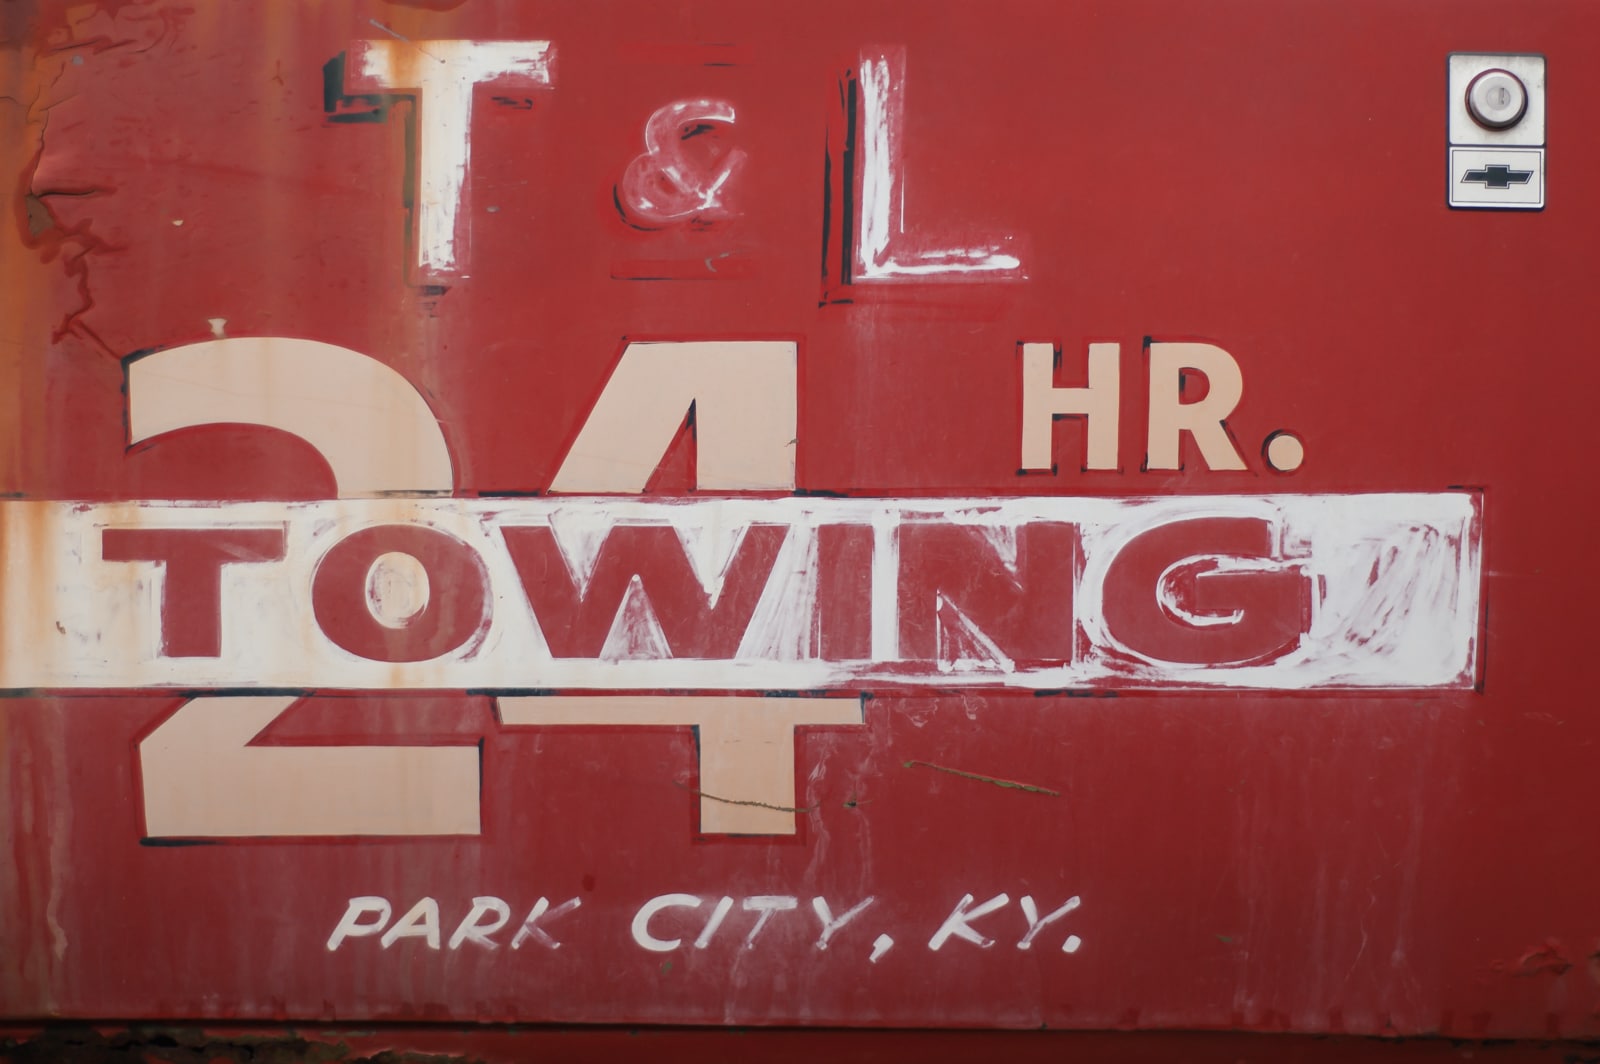 An old towing truck from Park City, Kentucky 